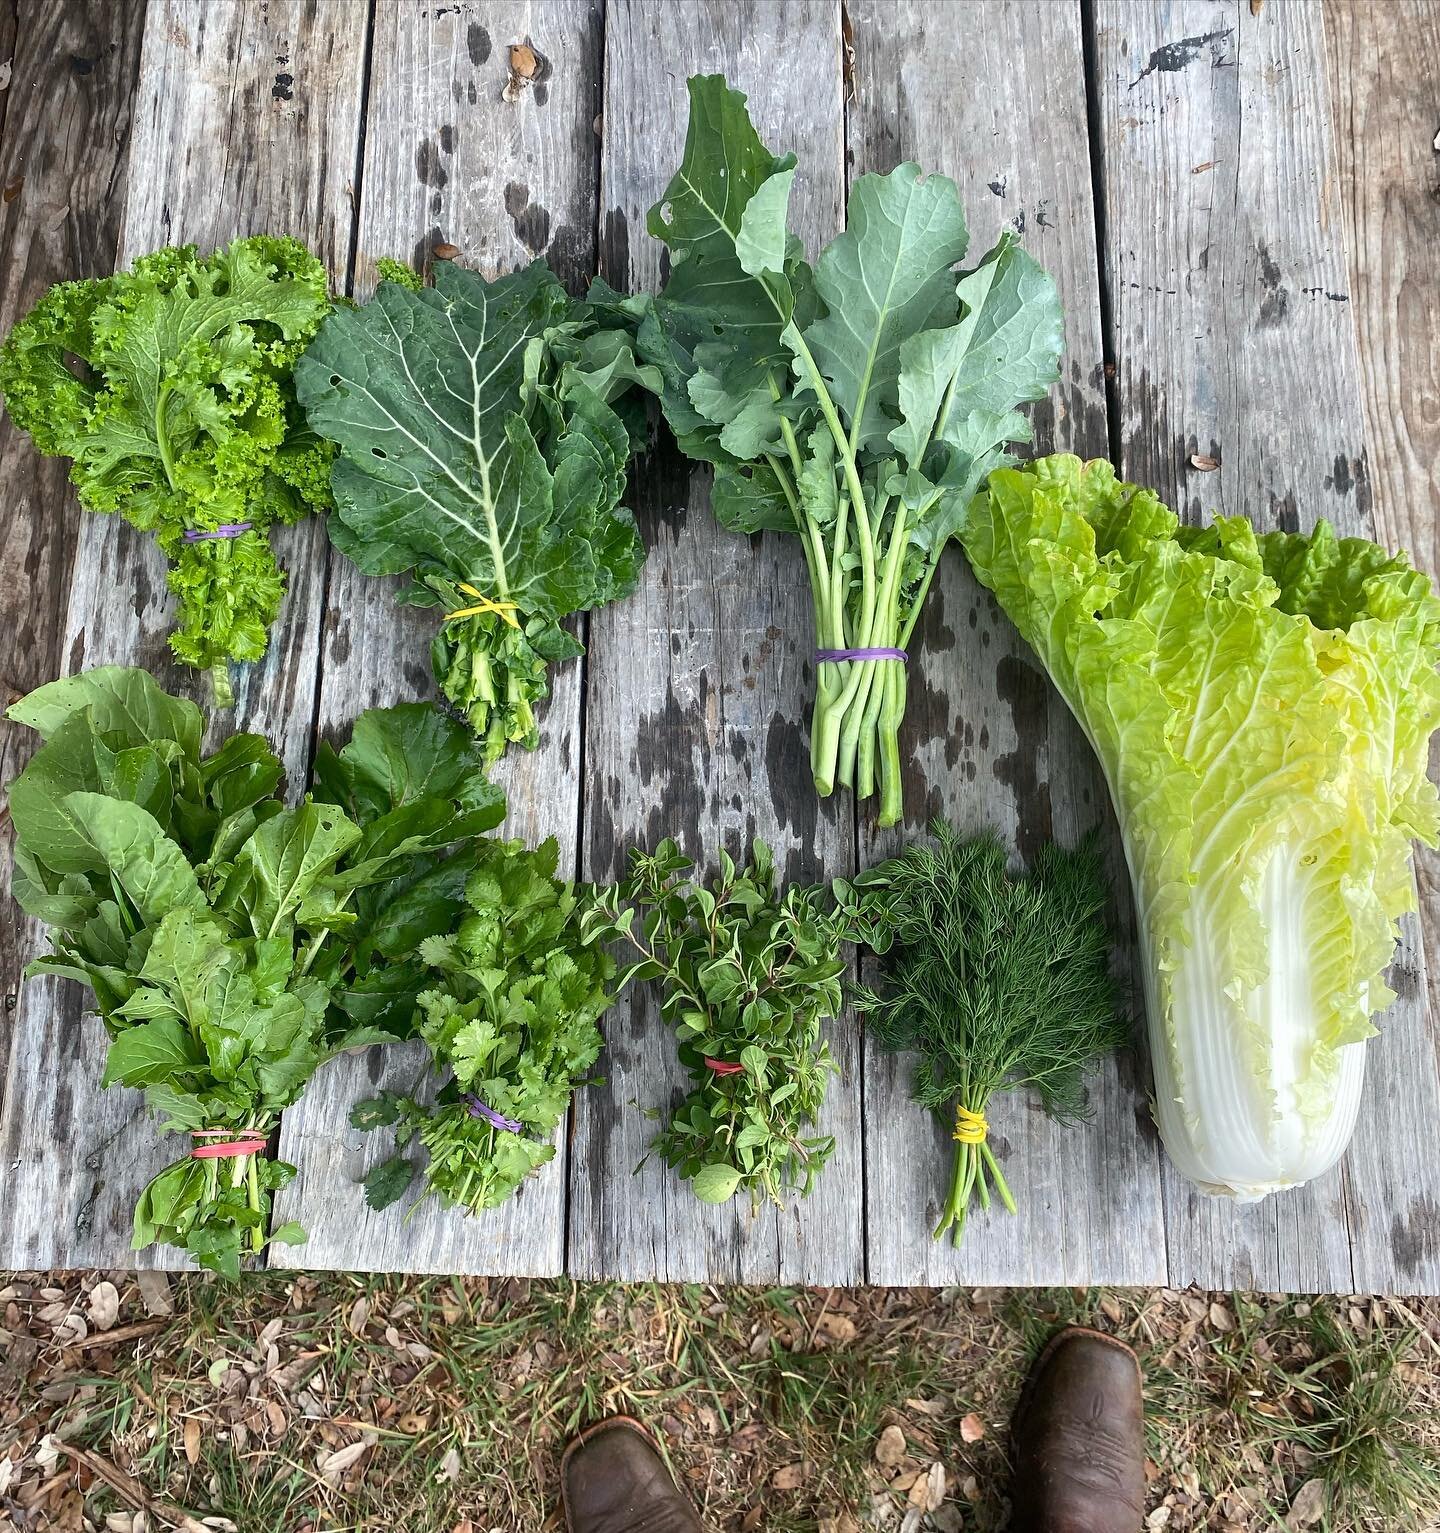 🌱CSA Update Hamilton Pool Vineyards and Farms! 🌱

Our CSA Box Subscription for this week! 📦✨

At Hamilton Pool Vineyards and Farms, we&rsquo;re dedicated to providing you with the freshest, locally grown produce straight from our beautiful fields.